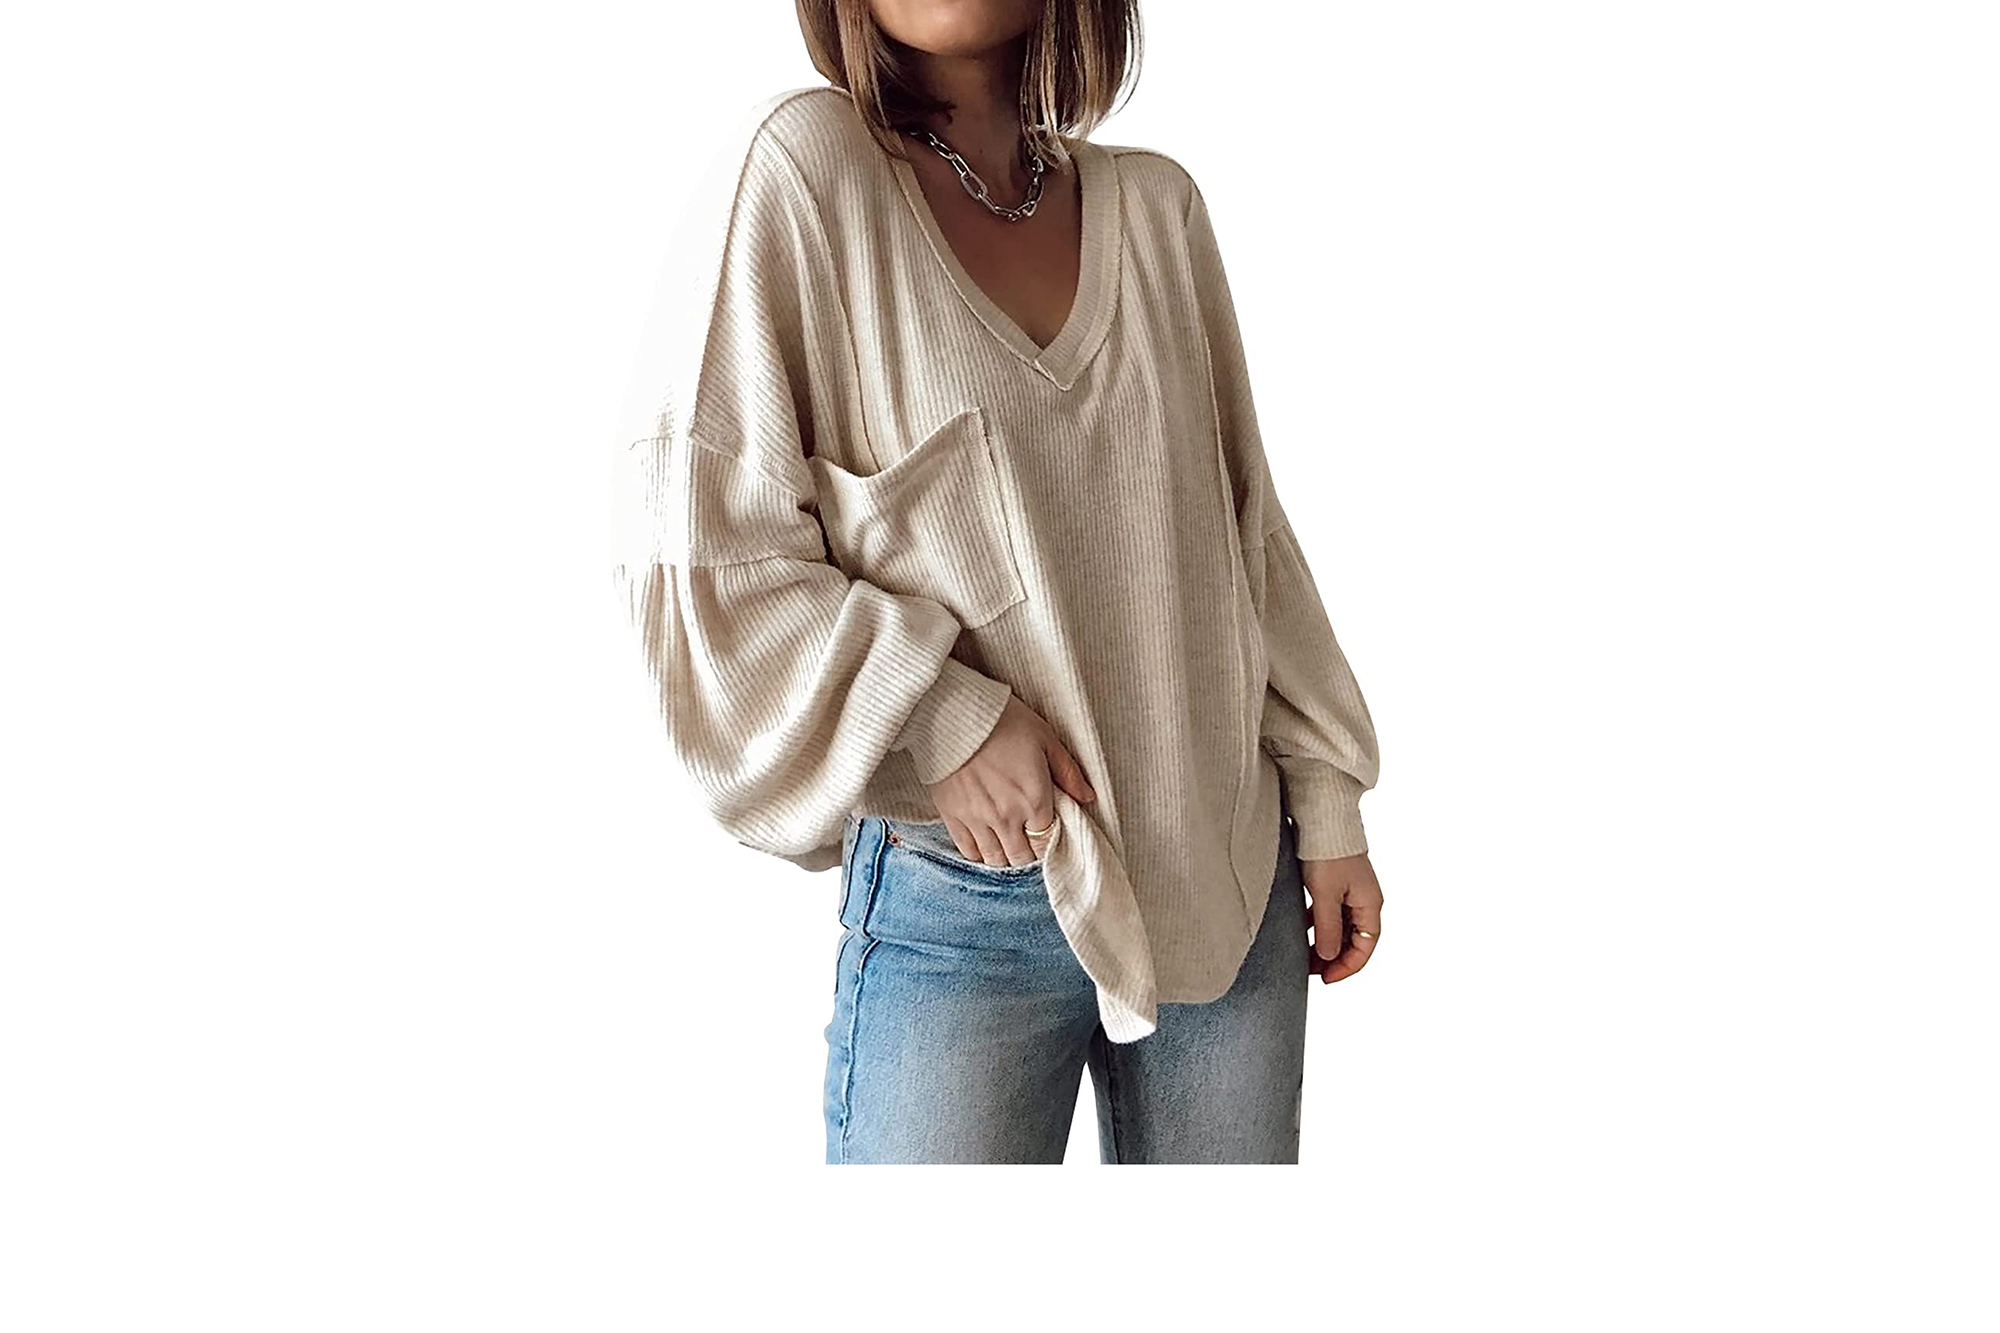 This Top-Rated Tunic Top Is a 'Super Soft' Must-Have